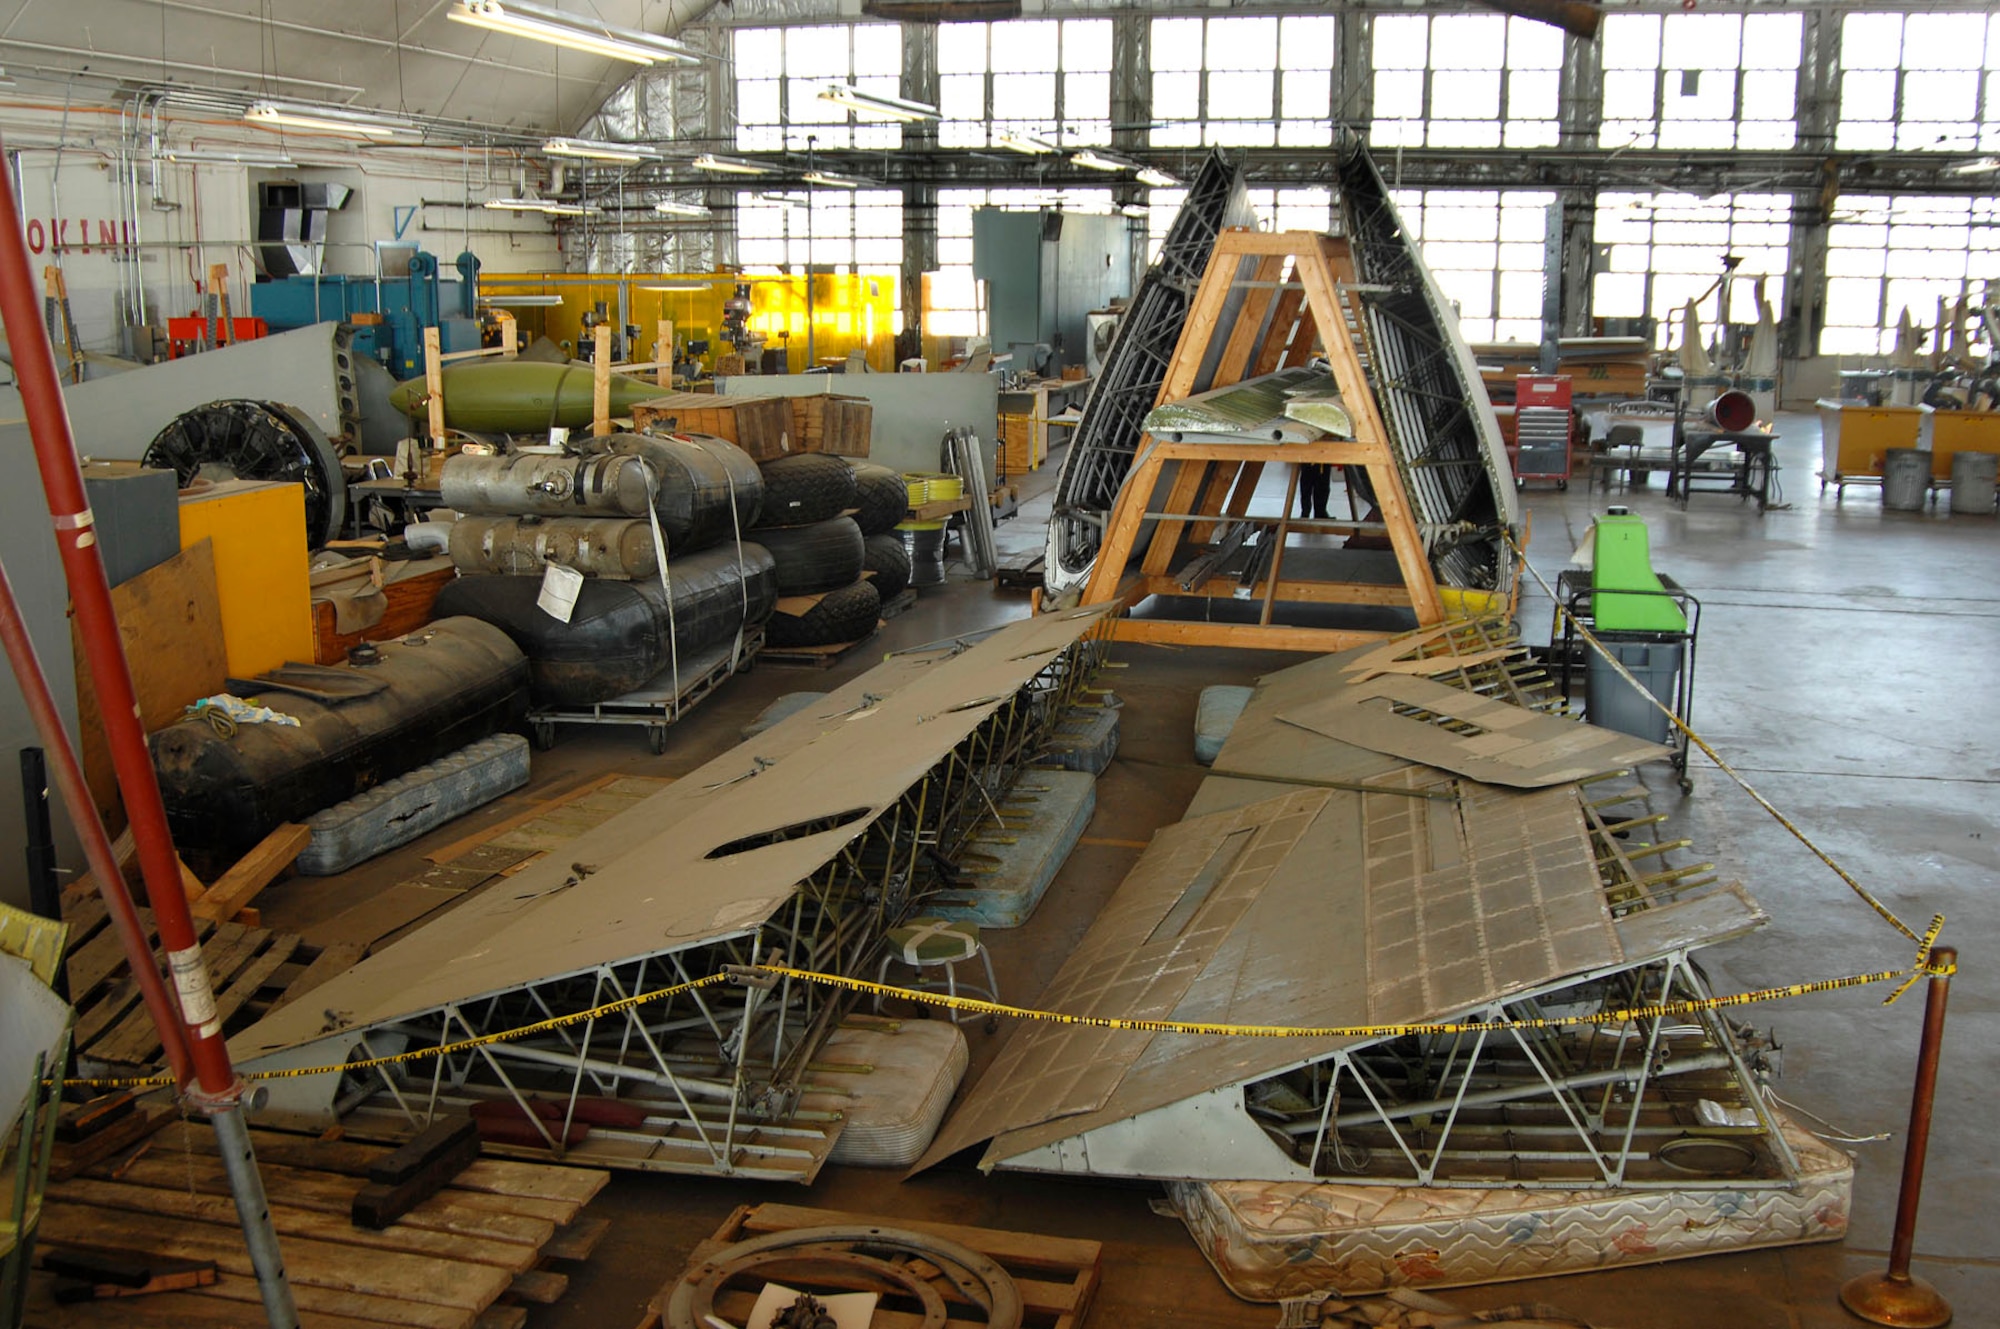 DAYTON, Ohio (02/2007) - Parts of the "Memphis Belle" in the restoration area of the National Museum of the U.S. Air Force. (U.S. Air Force photo by Ben Strasser)